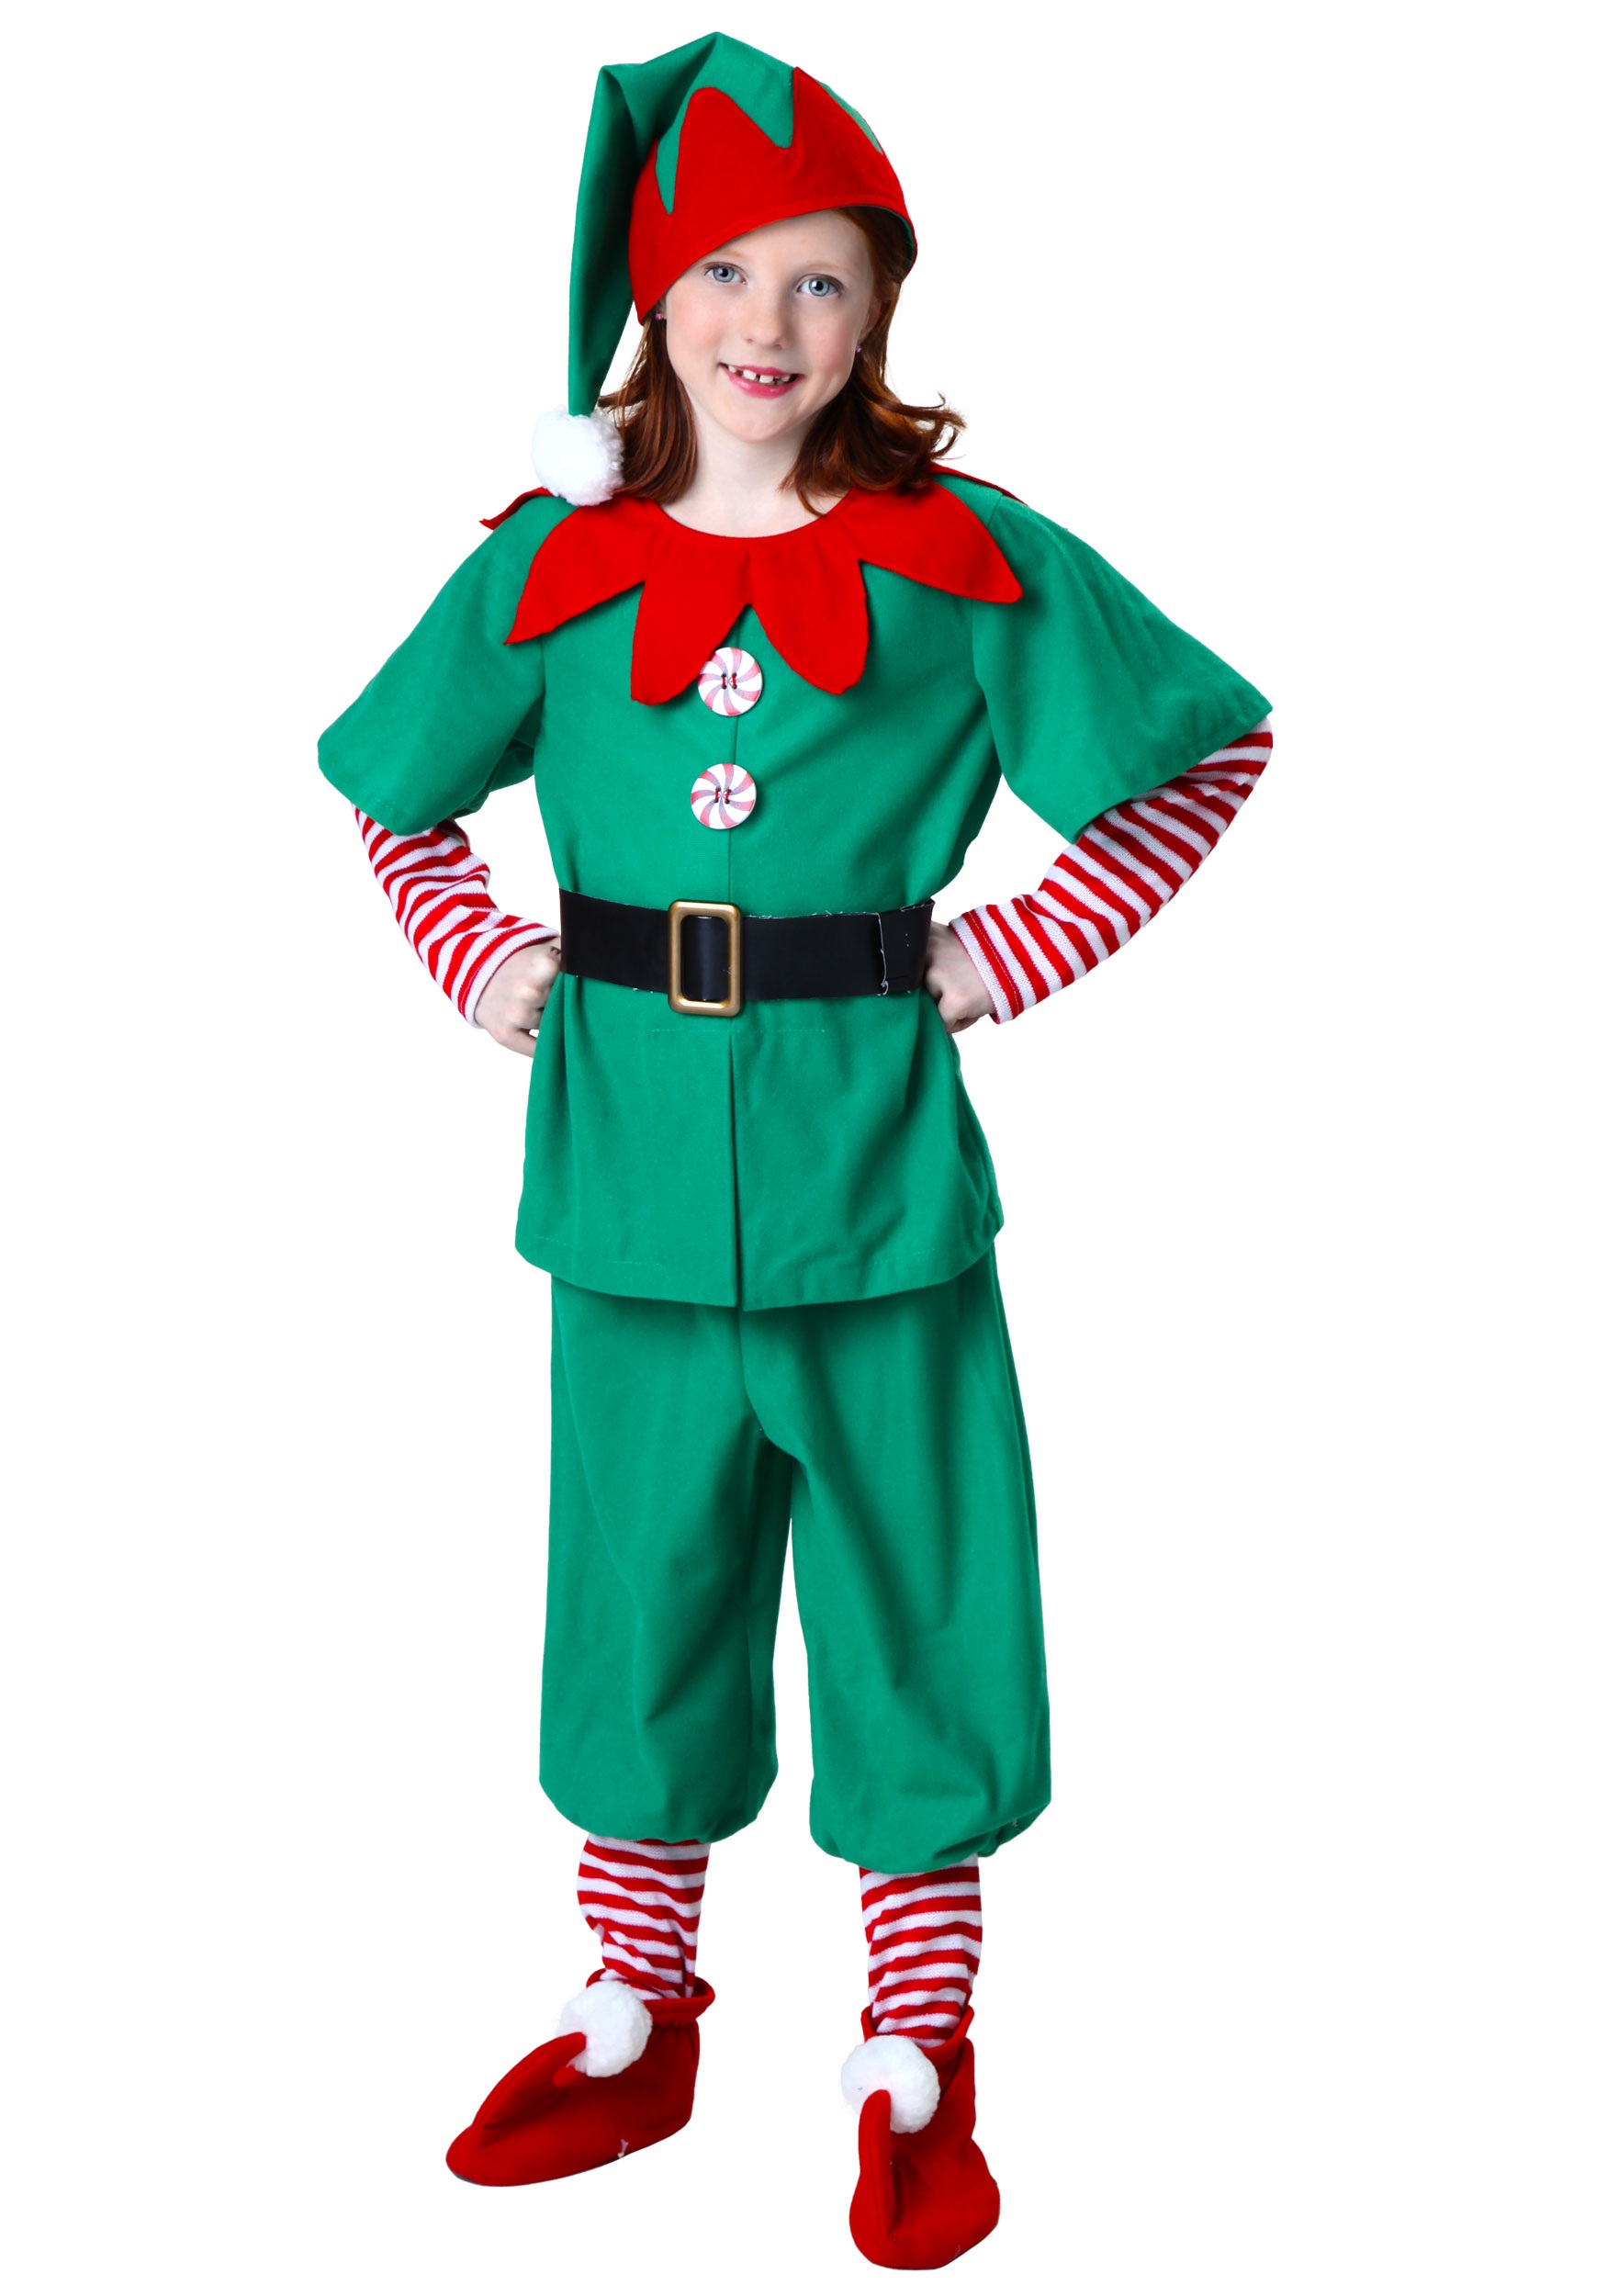 Elf Costume for Kids 3 Pcs Holiday Christmas Elf Outfit